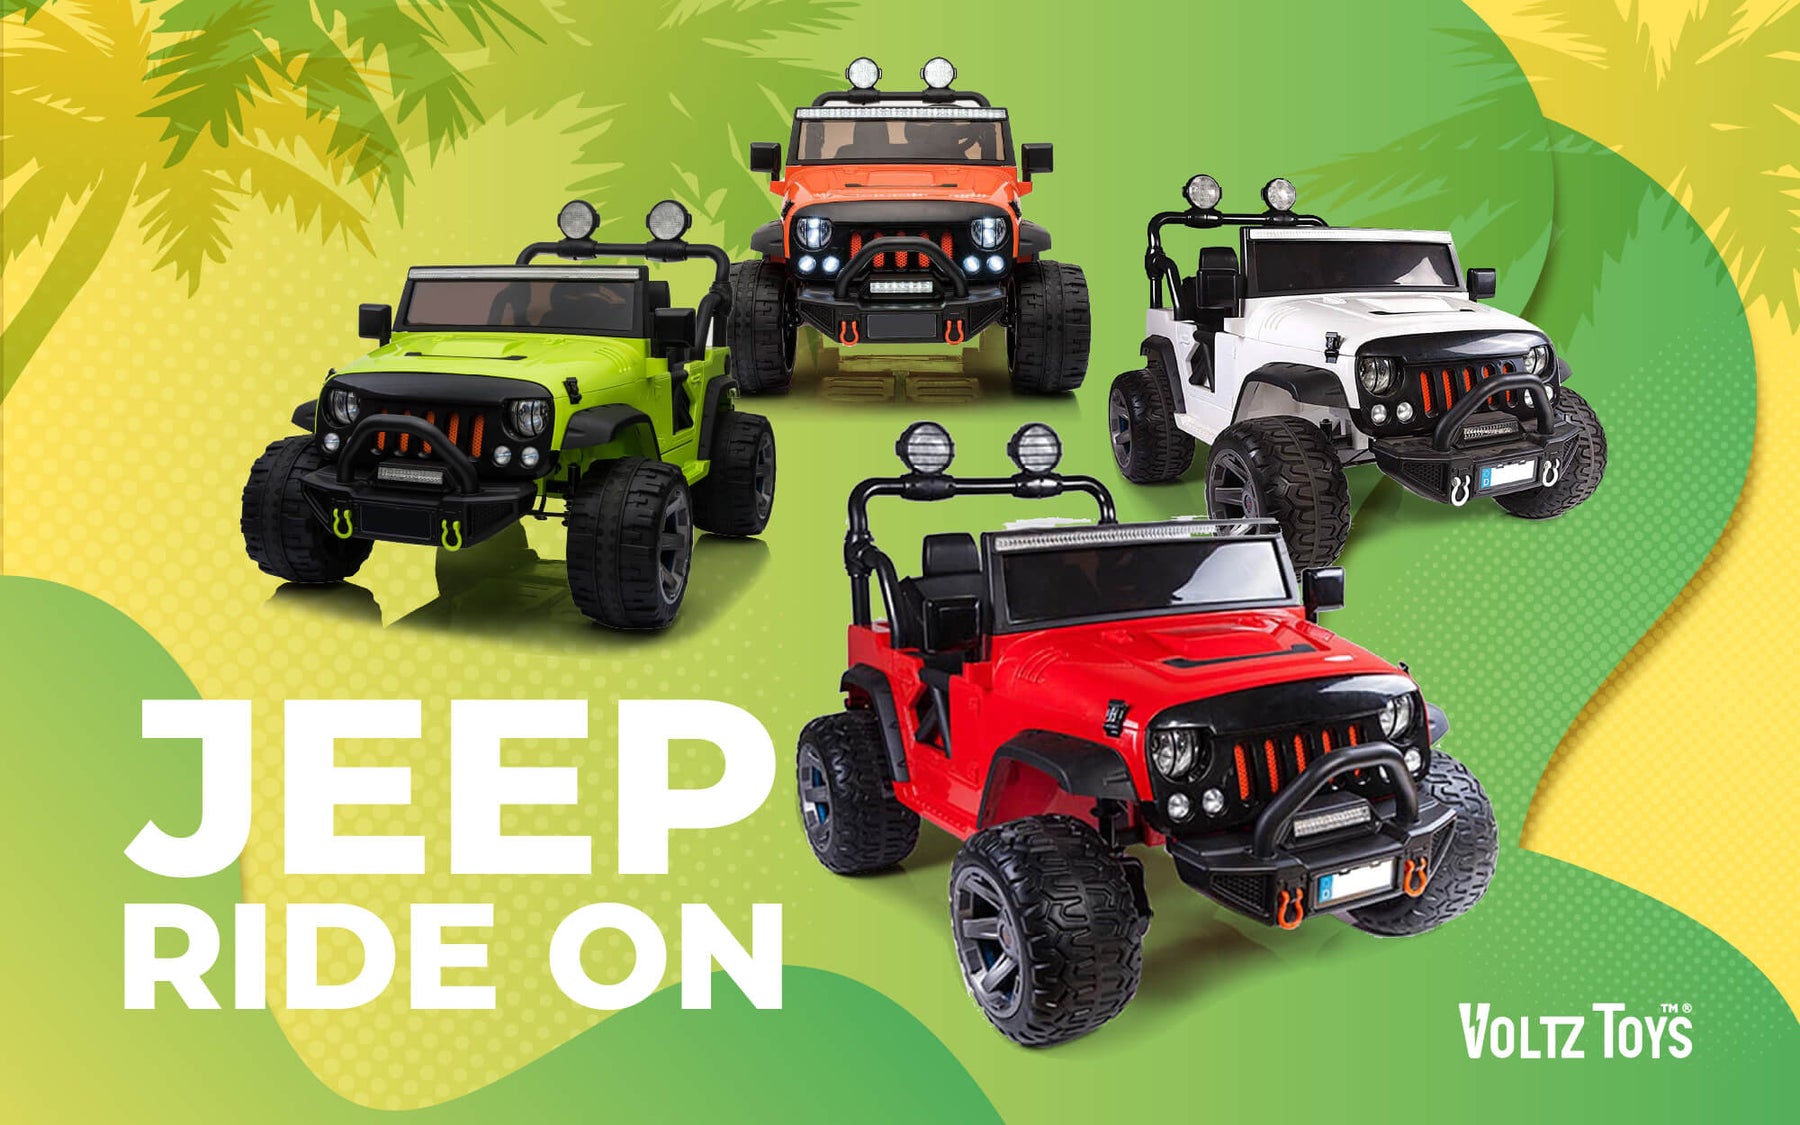 Jeep Ride On - Your kids’ best all season ride on choice for 2021